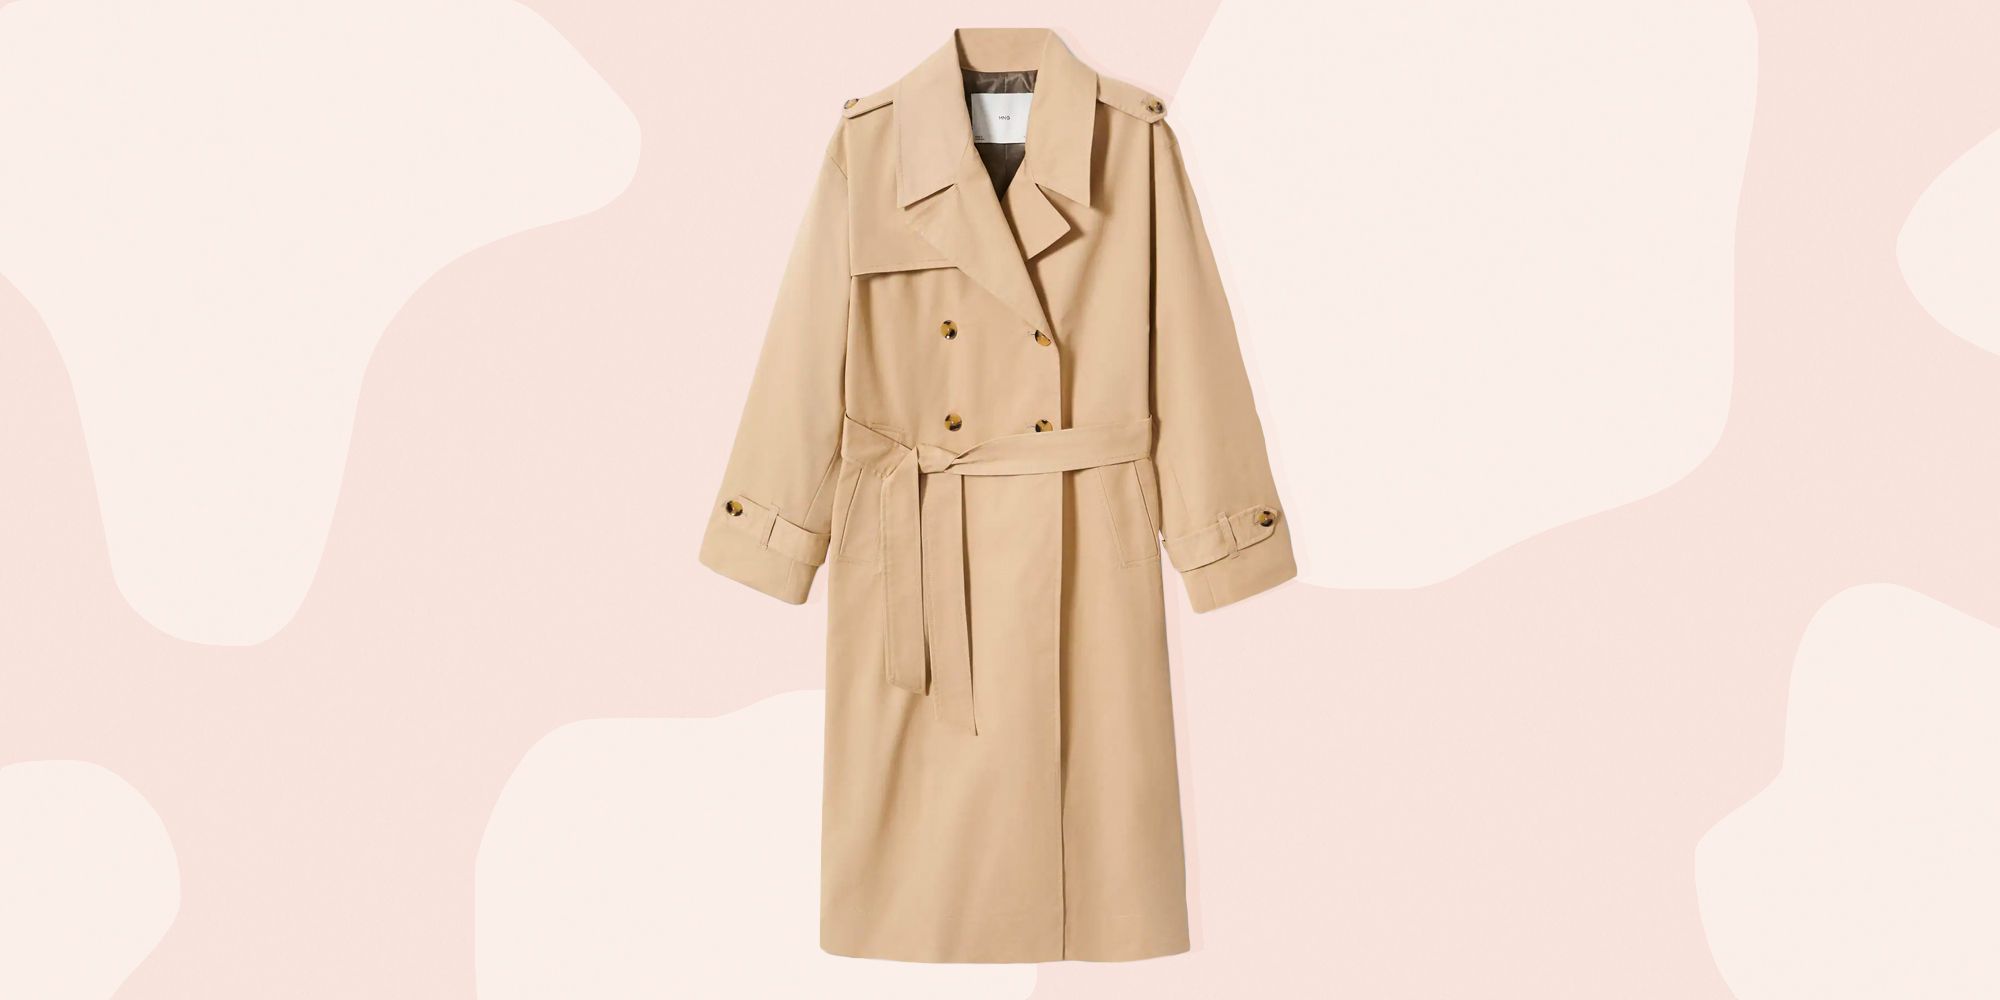 19 best trench coats for women to try in 2023